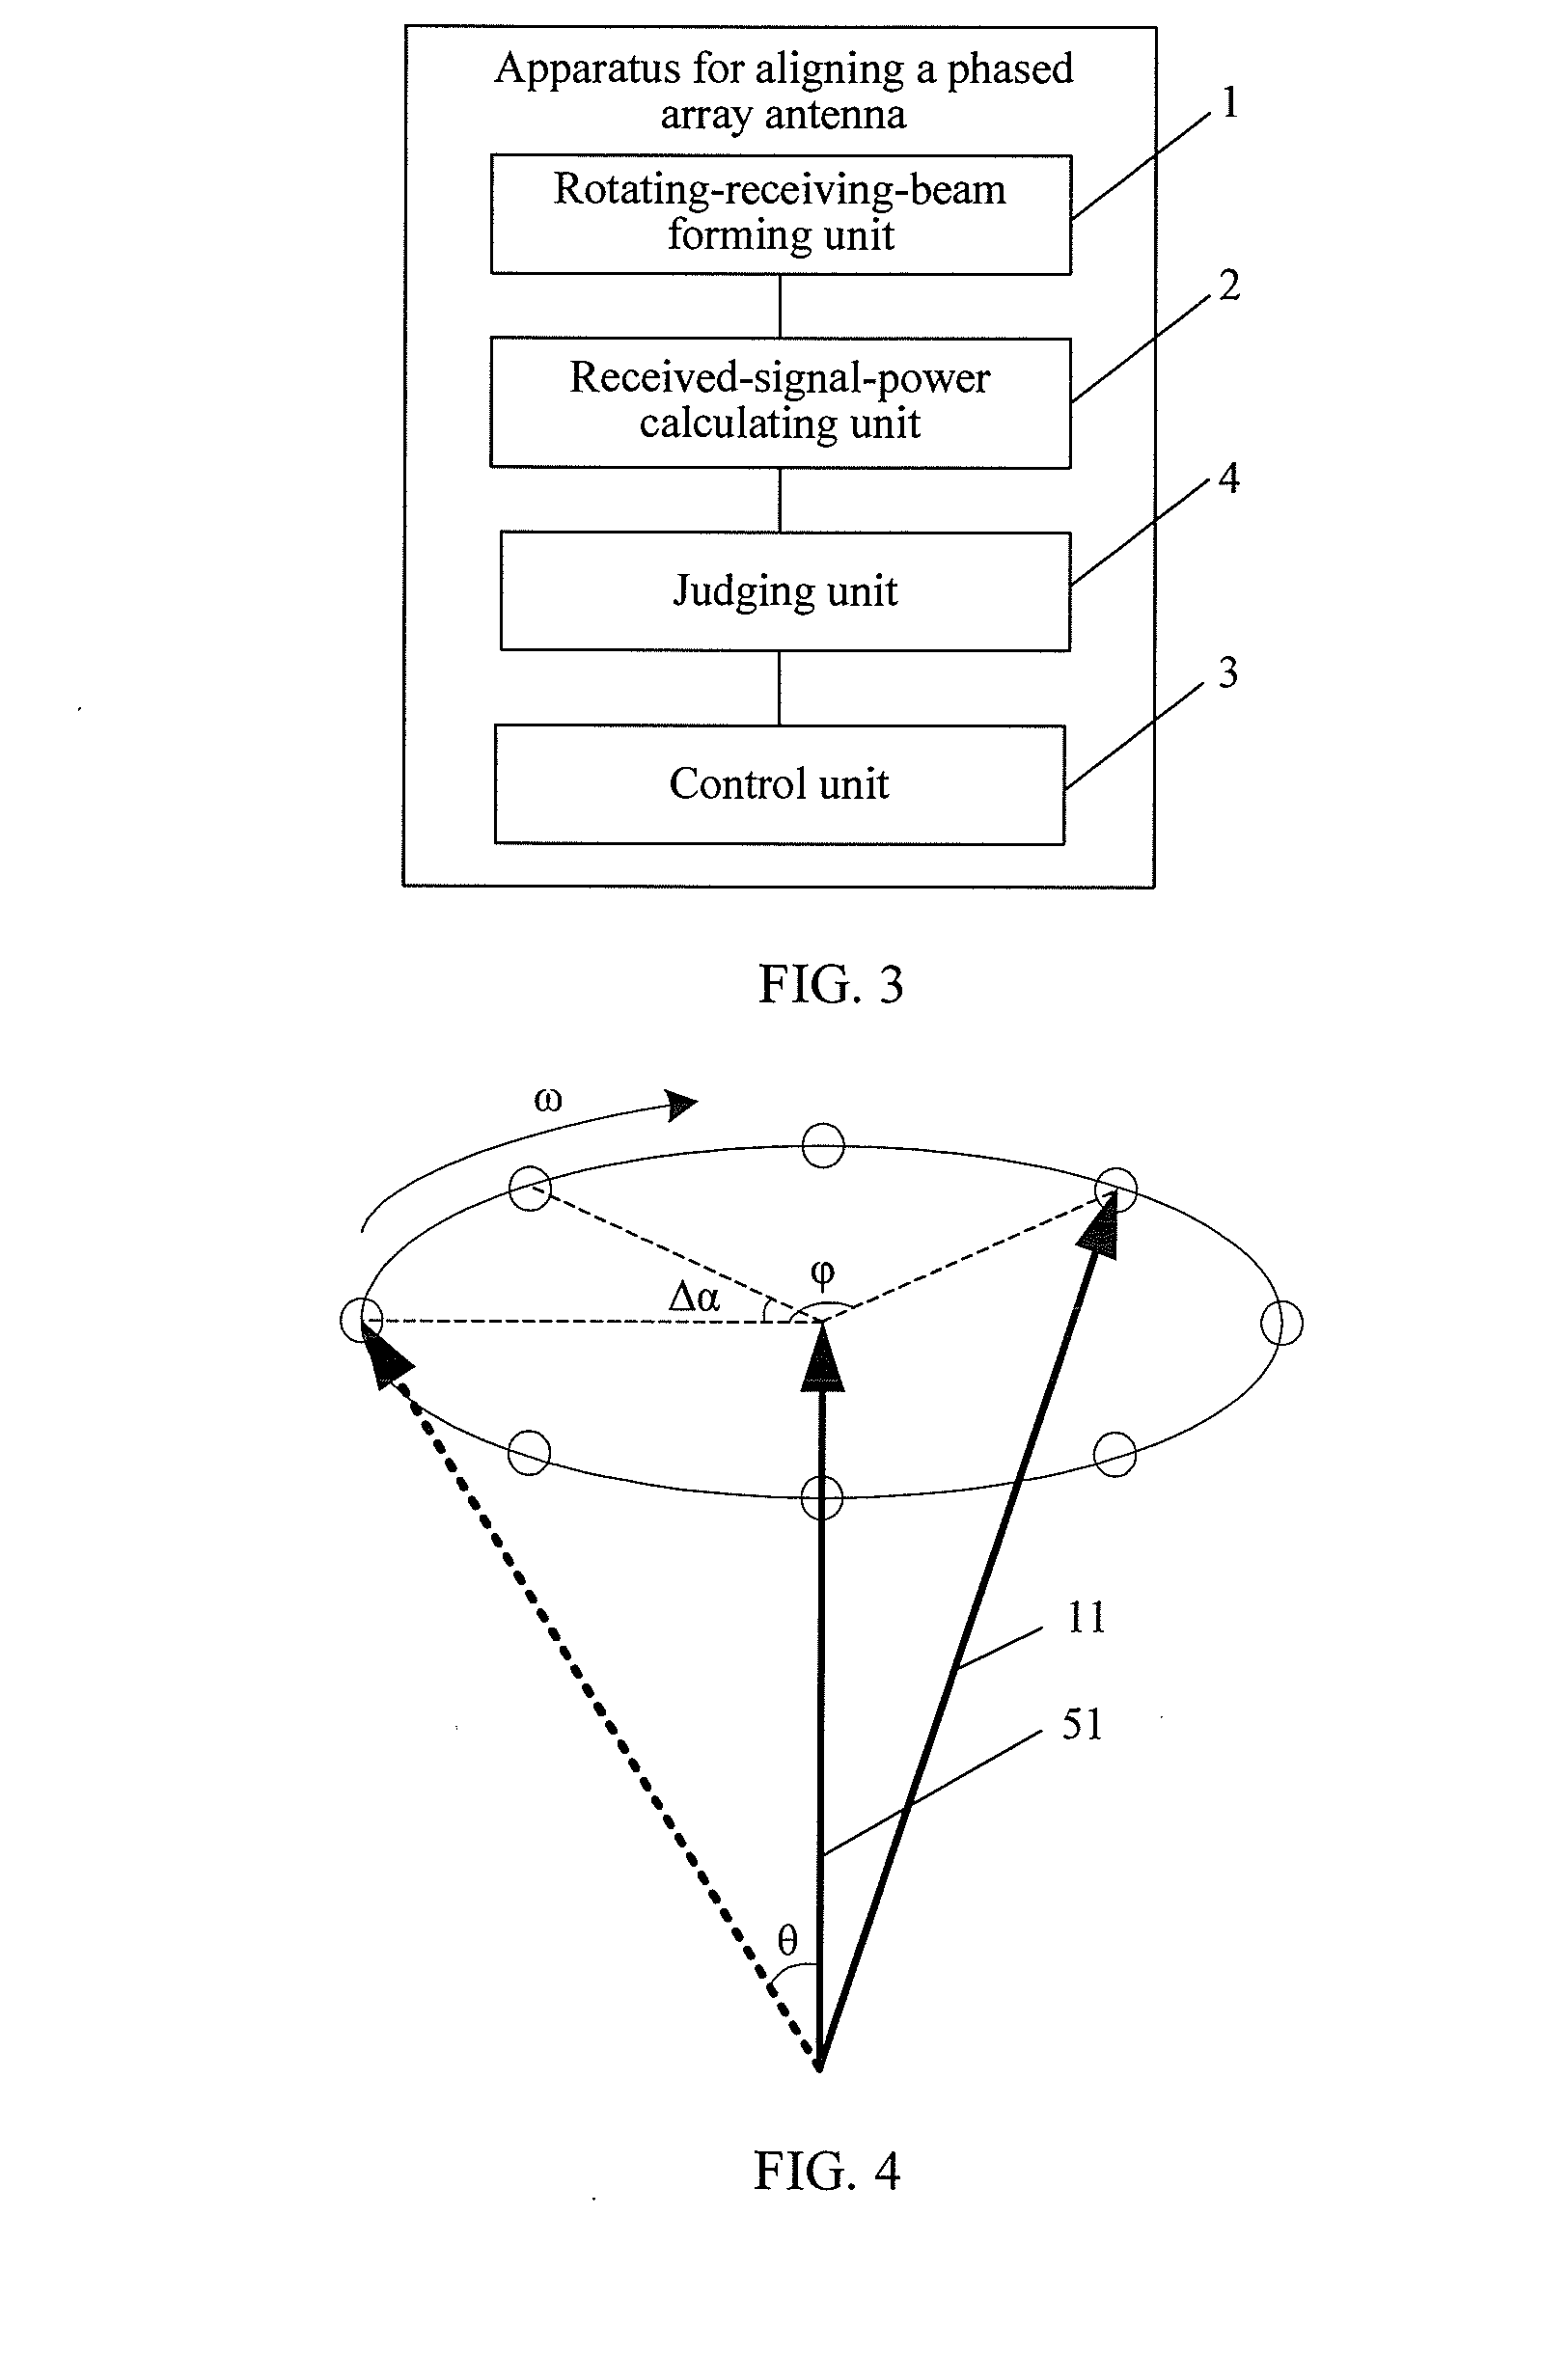 Method and apparatus for aligning phased array antenna, and phased array antenna